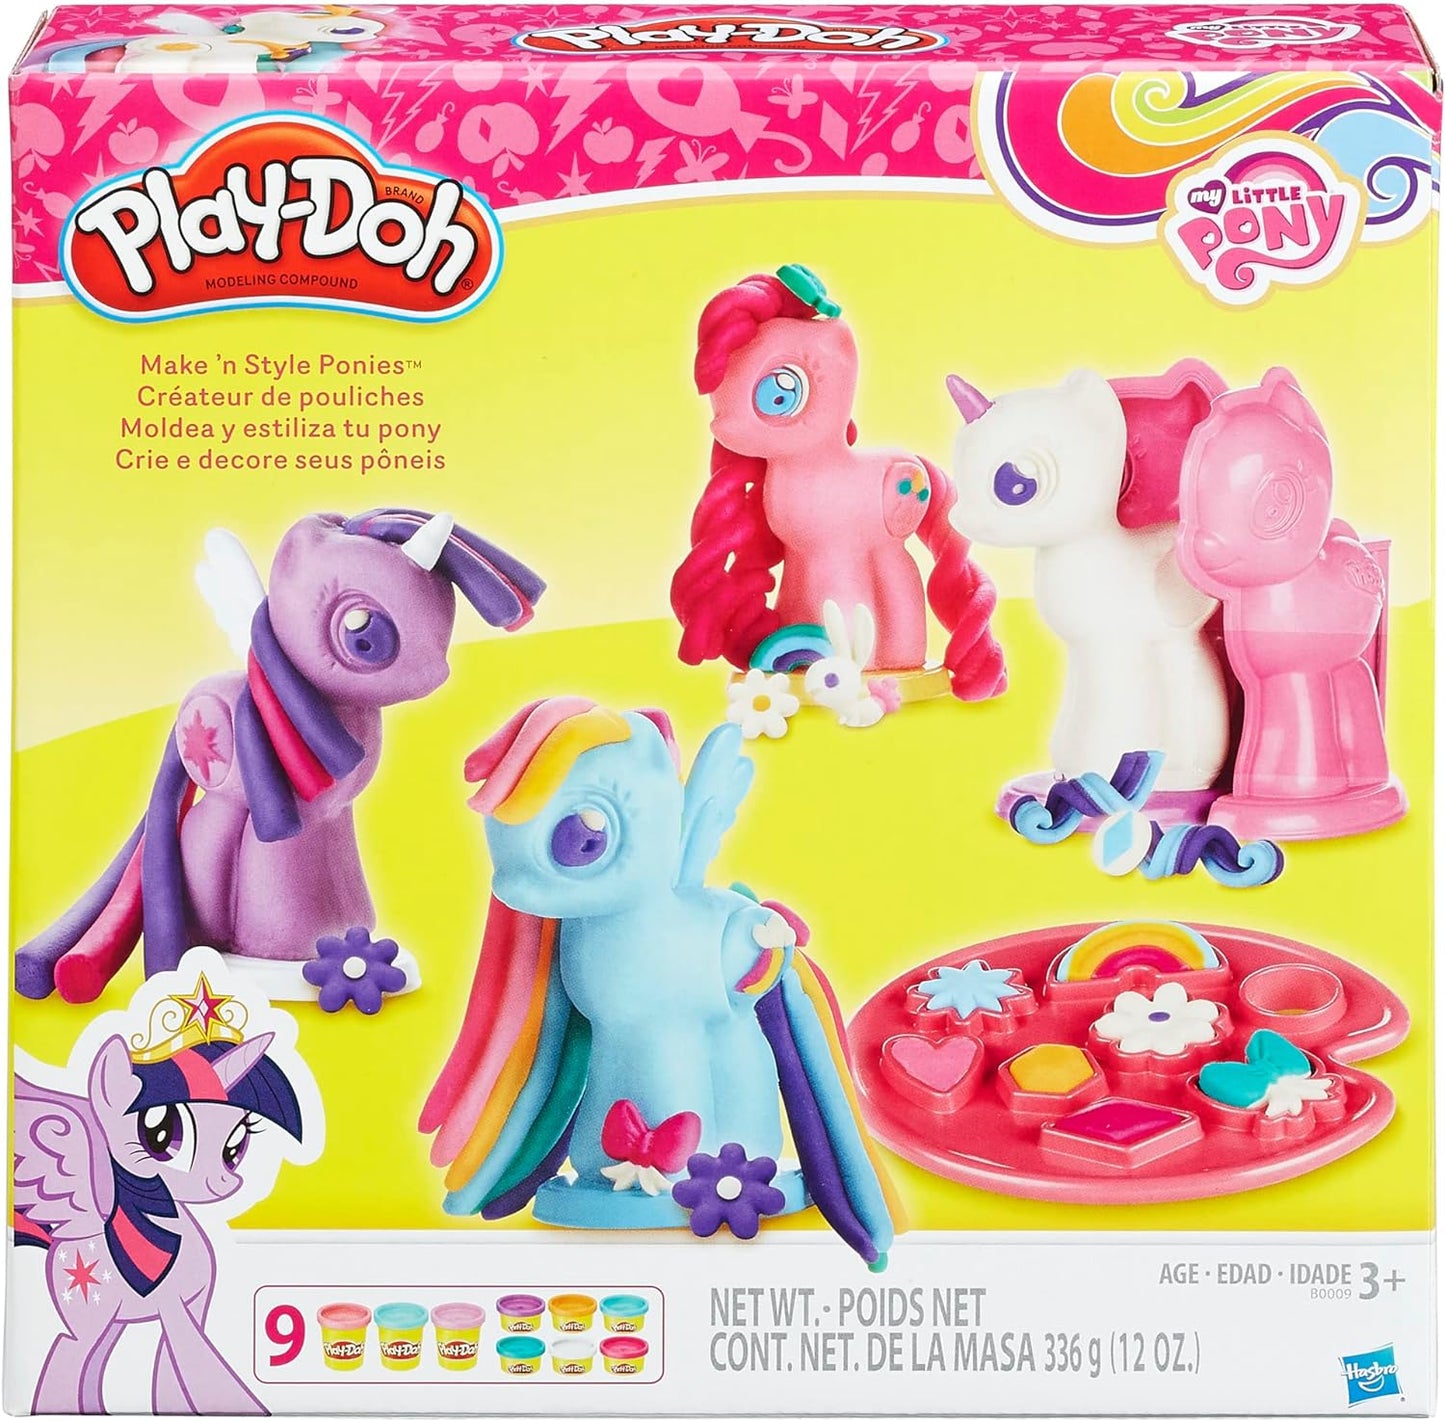 Play-Doh My Little Pony Make 'n Style Ponies, Perfect Christmas Stocking Stuffers for Kids or Holiday Gifts (Amazon Exclusive)